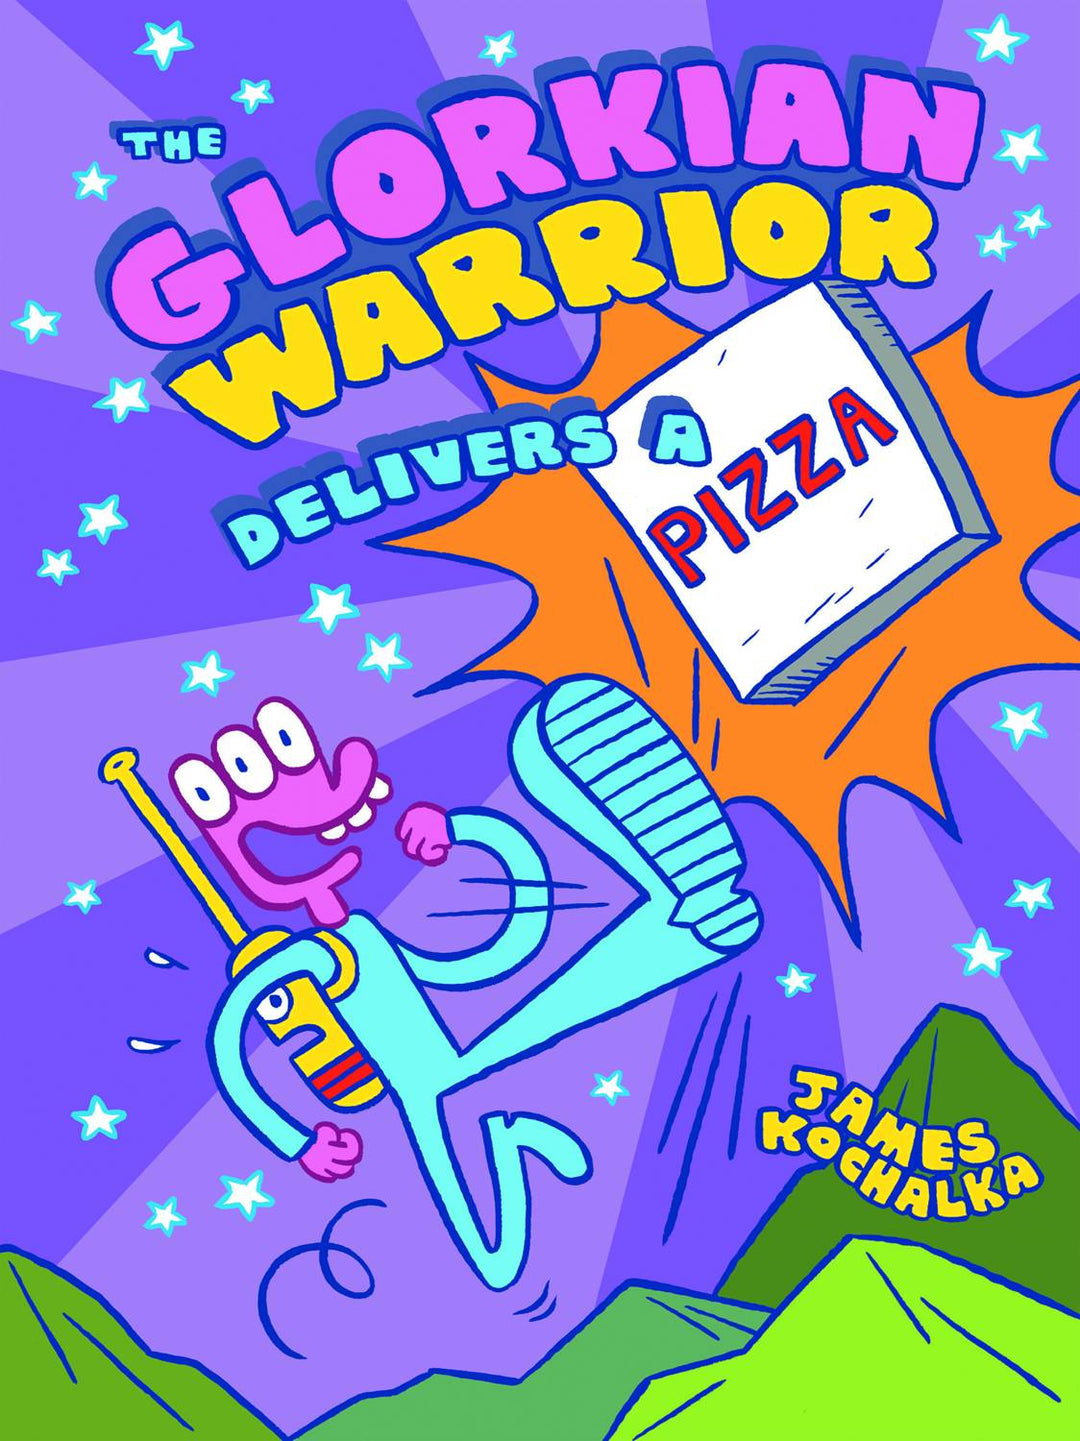 Glorkian Warrior Delivers A Pizza Graphic Novel OXK-02